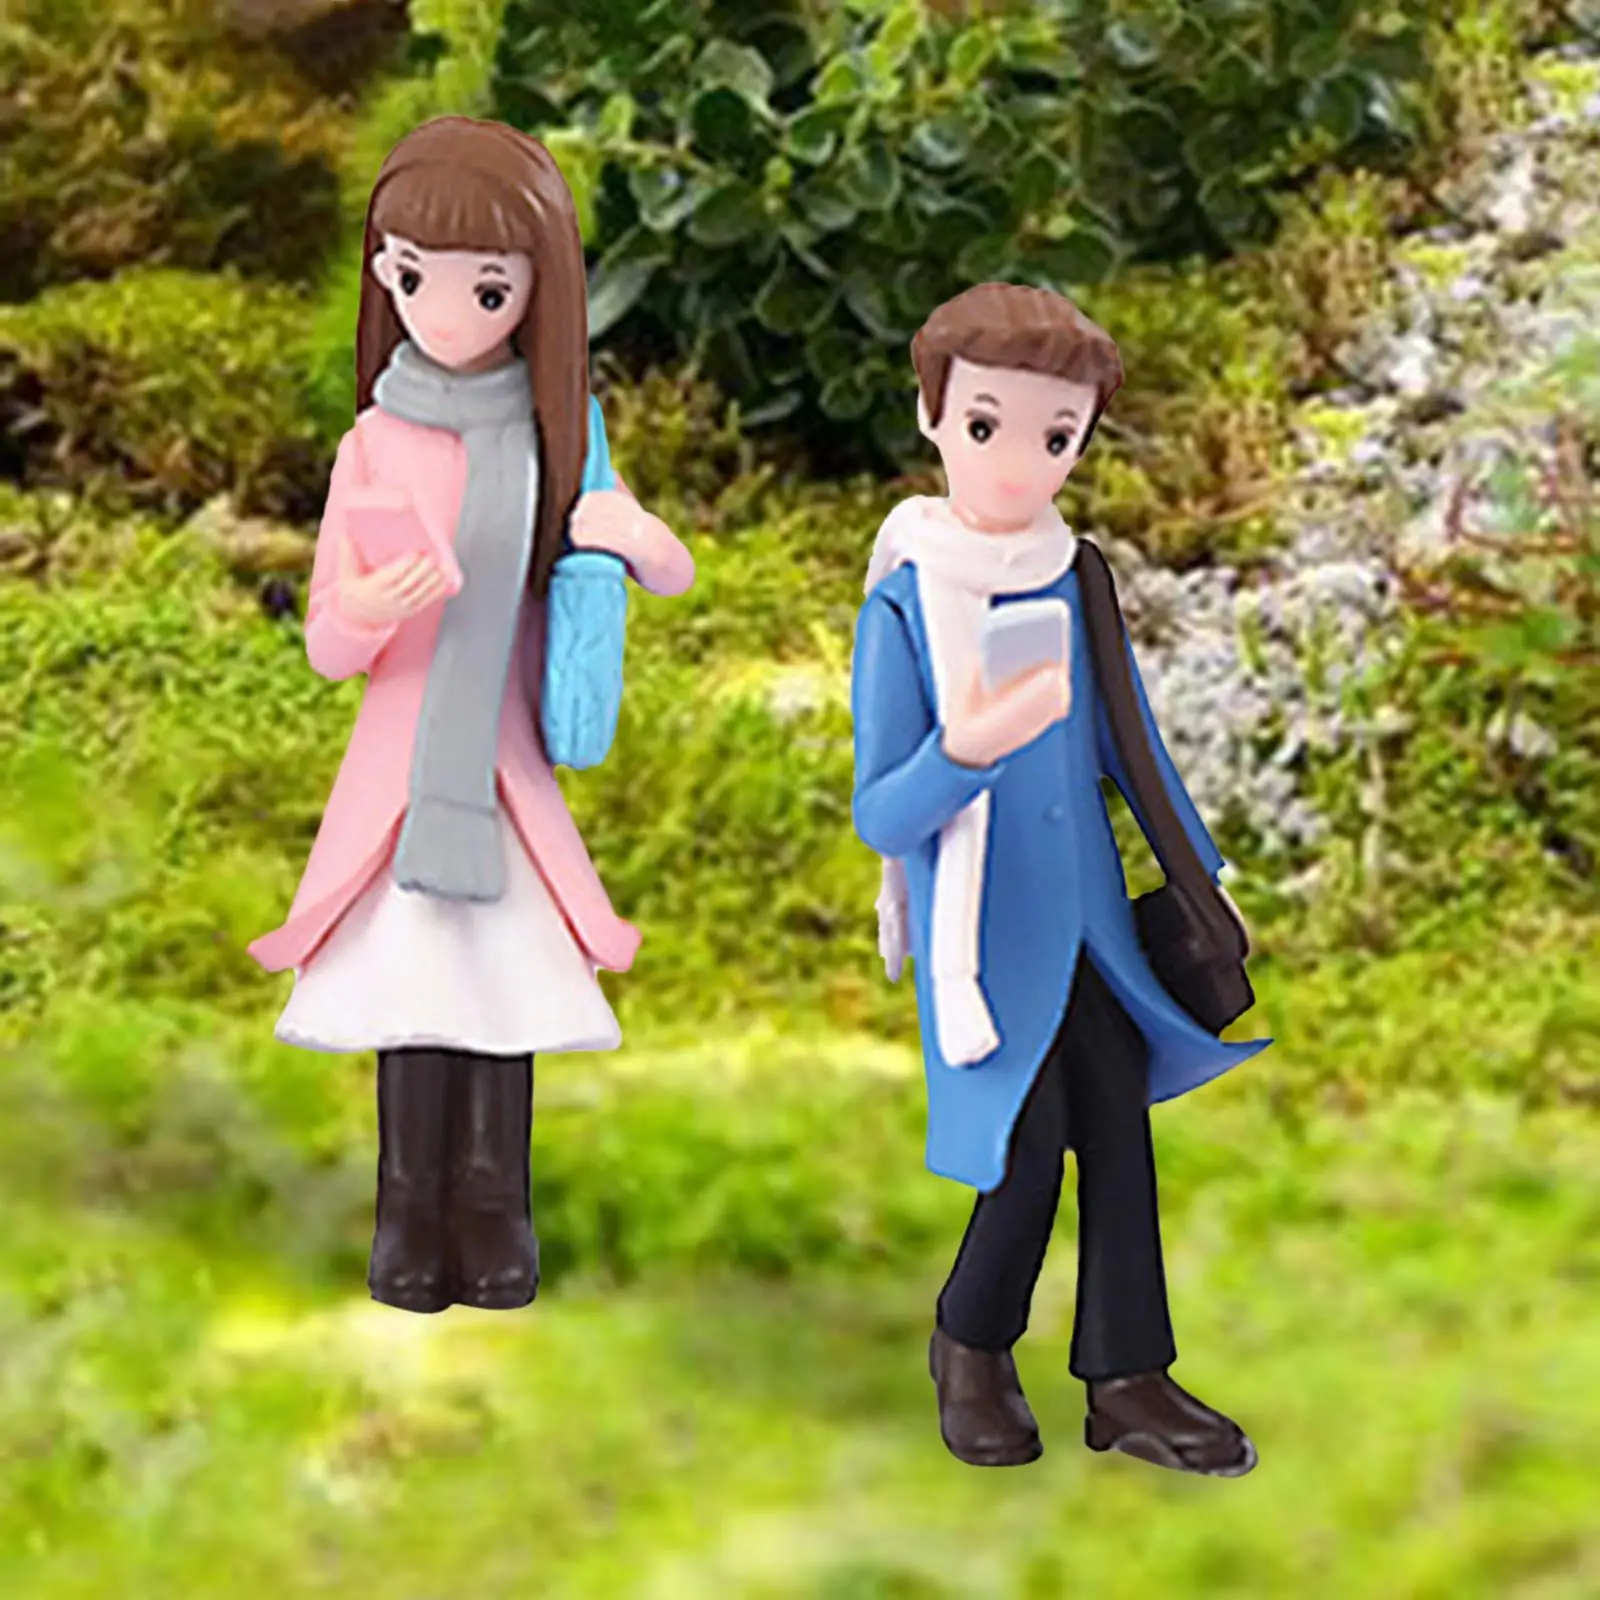 Phone Couple Tiny Hand Painted Standing Model Trains People Figures for Diorama Photography Props Micro Landscapes Decoration